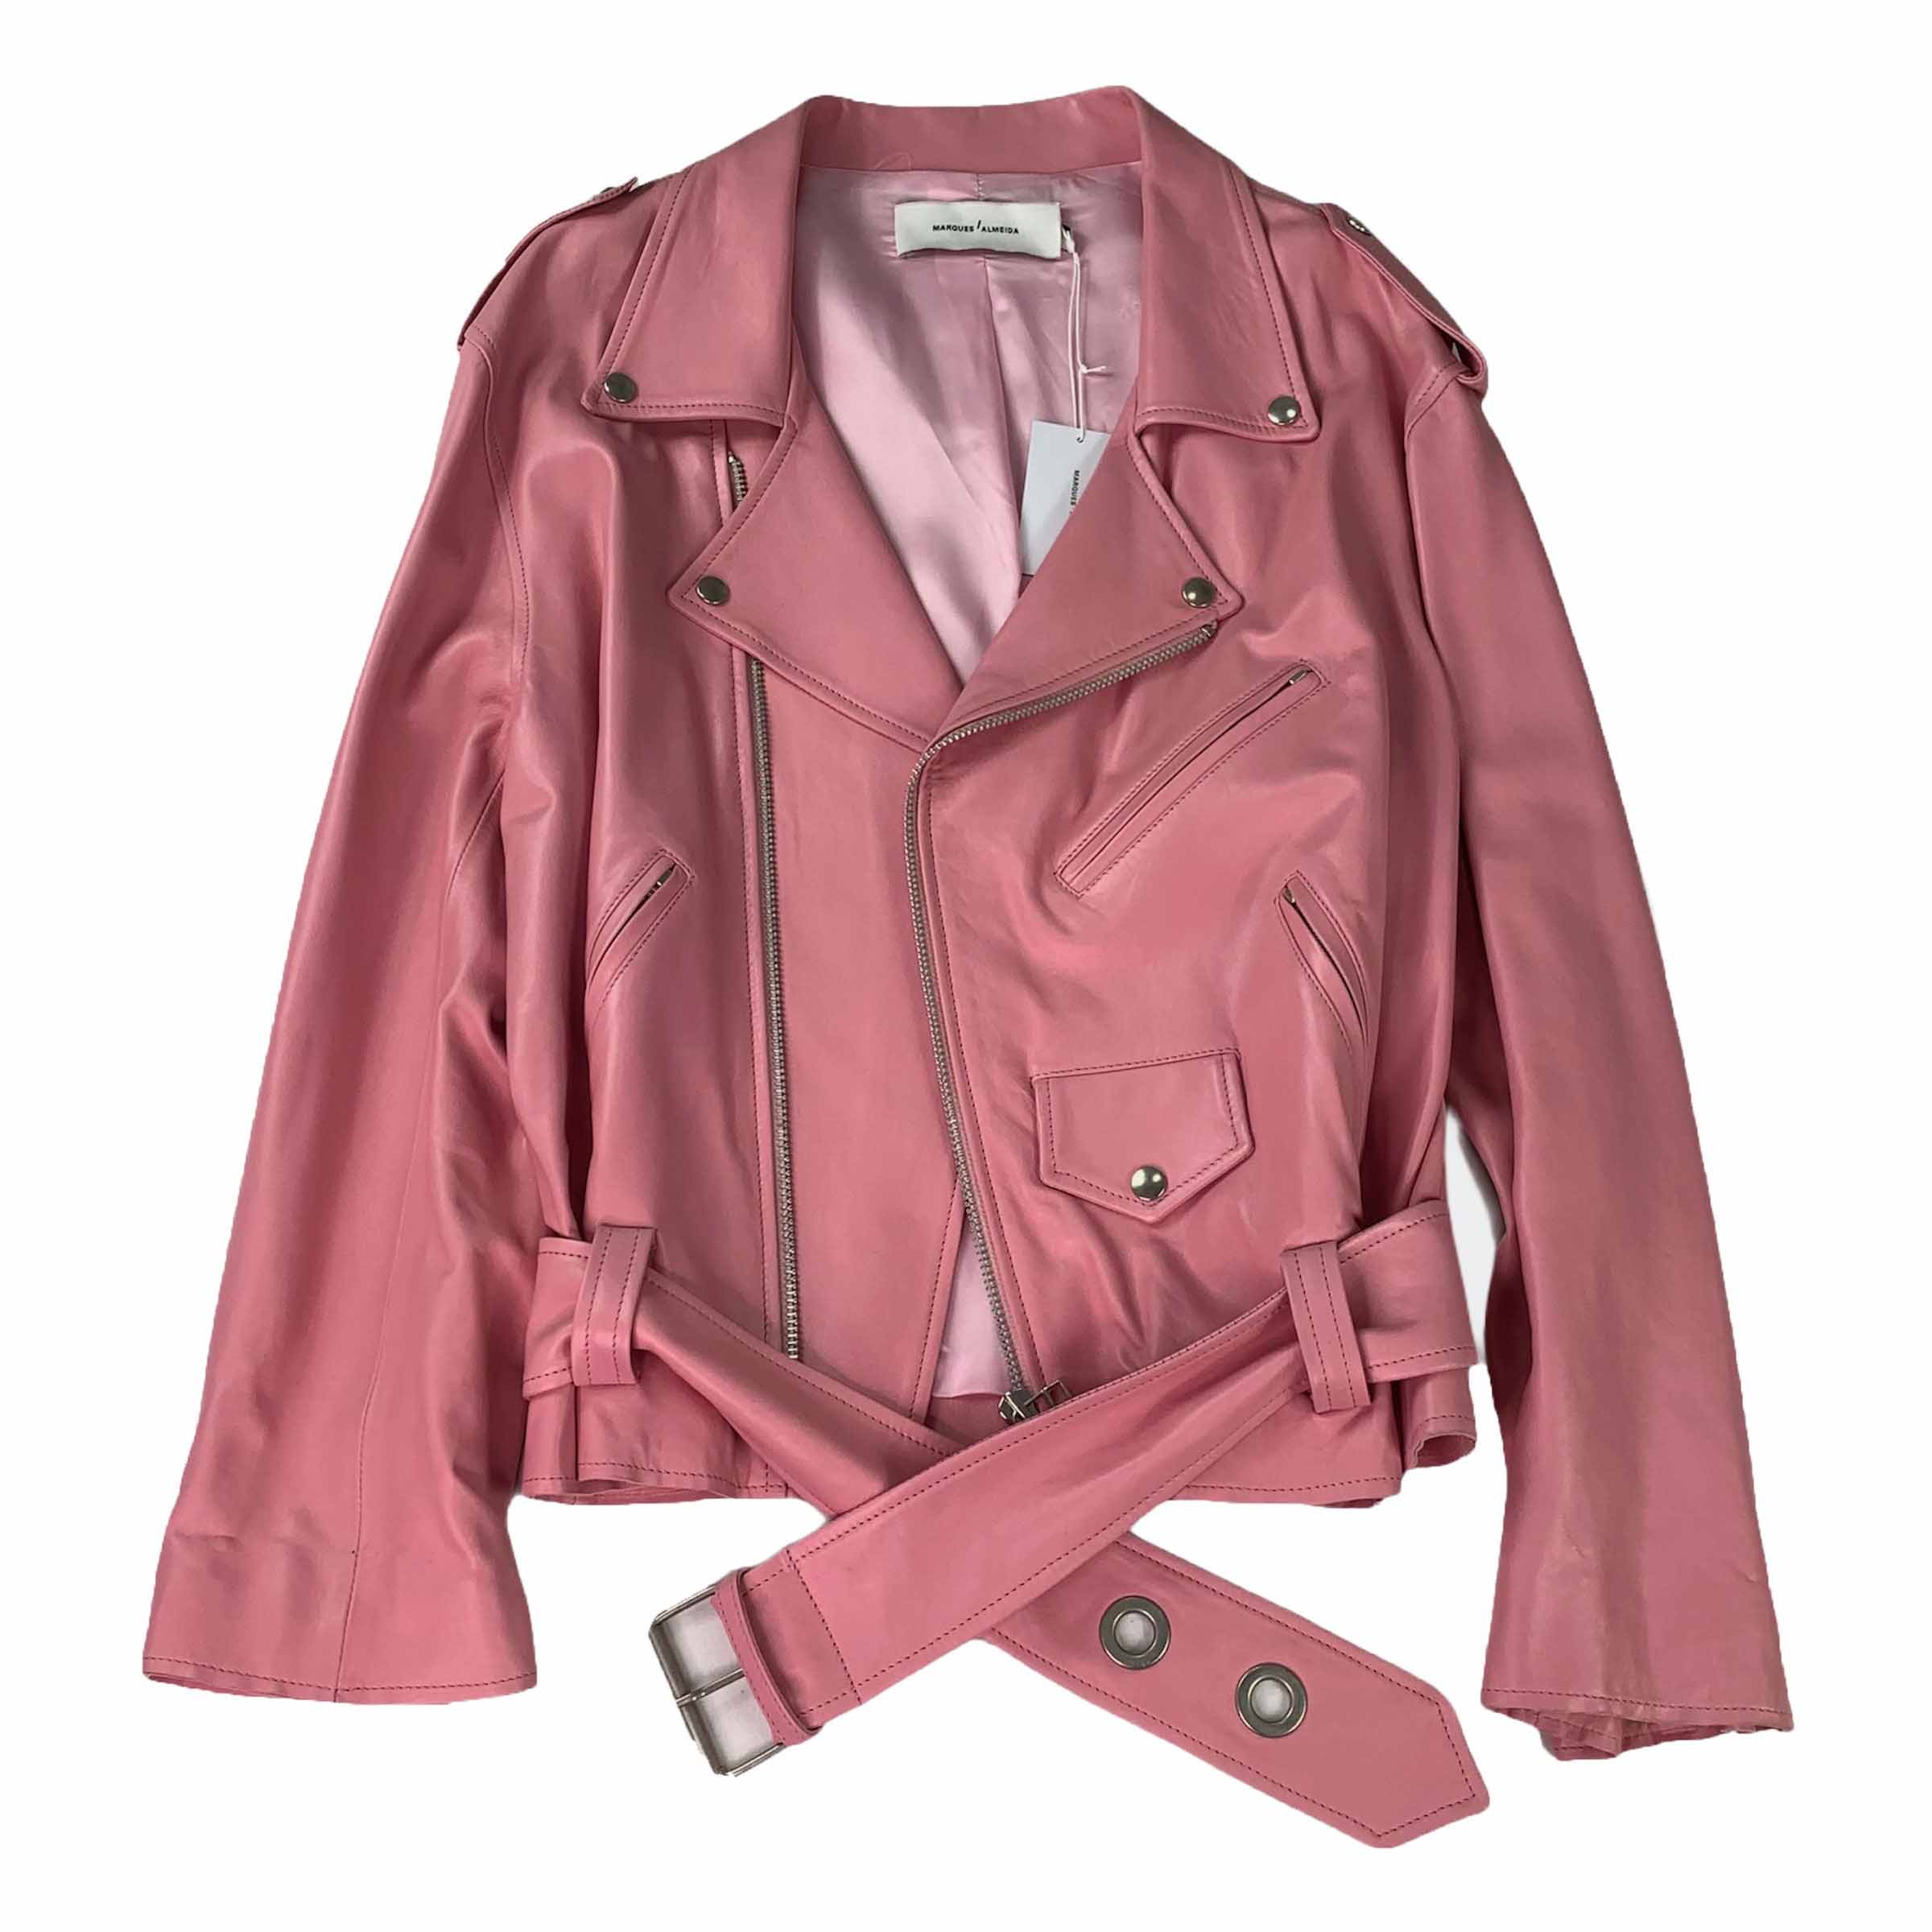 [Marques Almeida] Pink Leather Rider Jakcet  - SIZE S